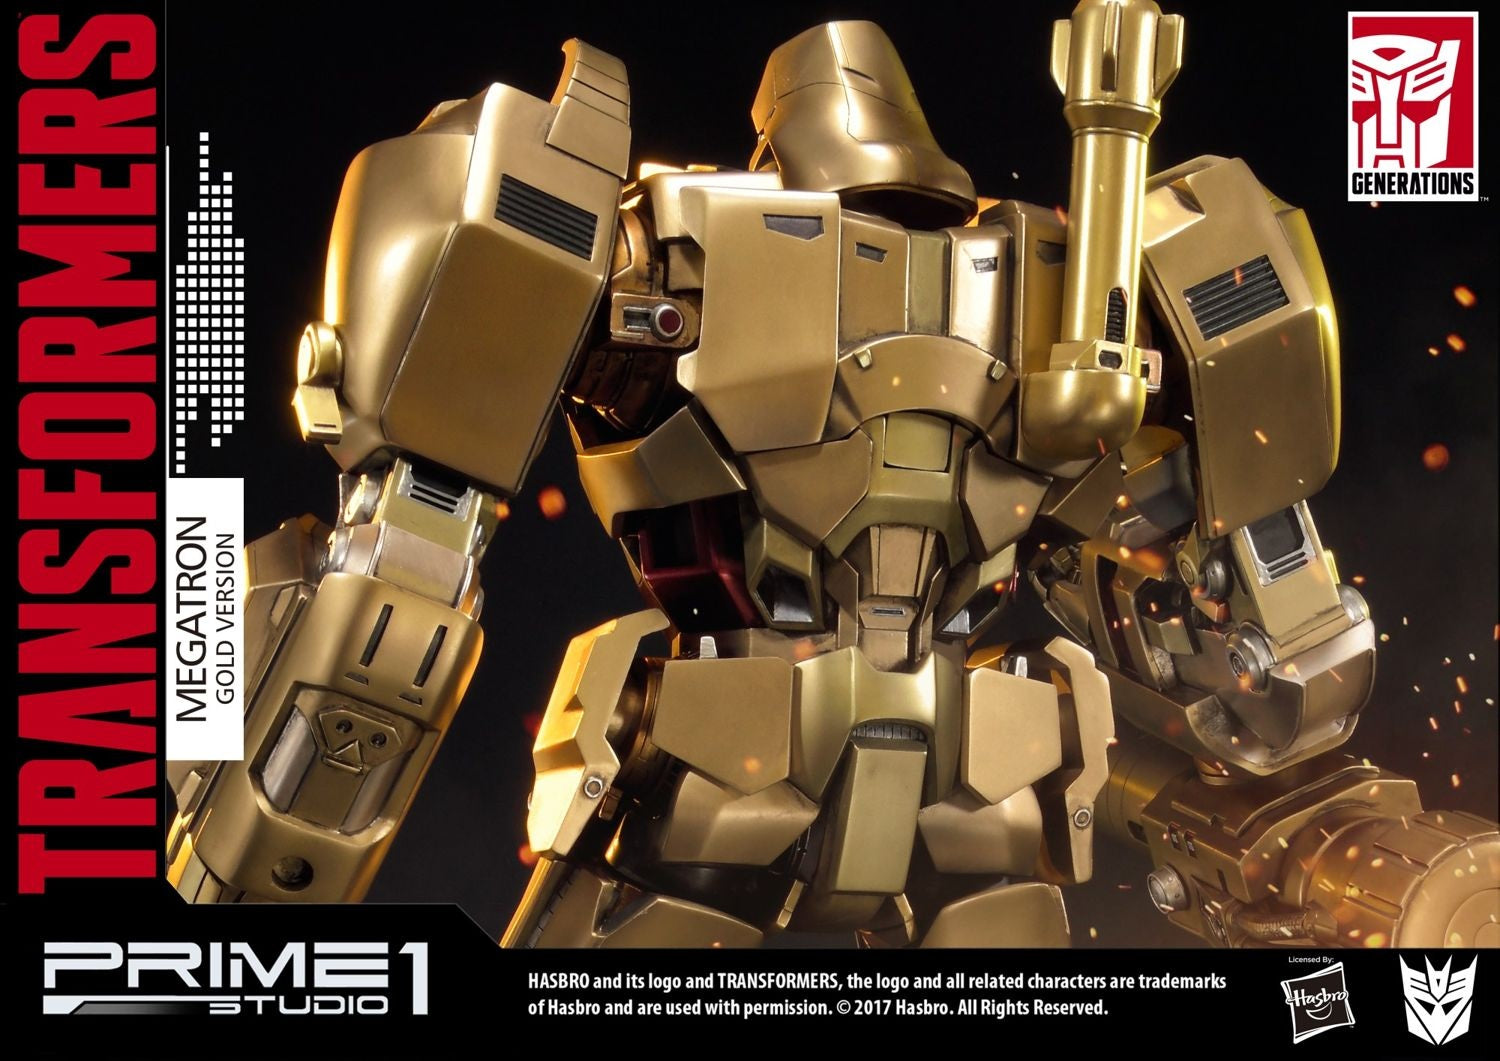 PRIME 1 STUDIO MEGATRON GOLD EDITION TRANSFORMERS GENERATION 1 - PMTF-02GL - Anotoys Collectibles